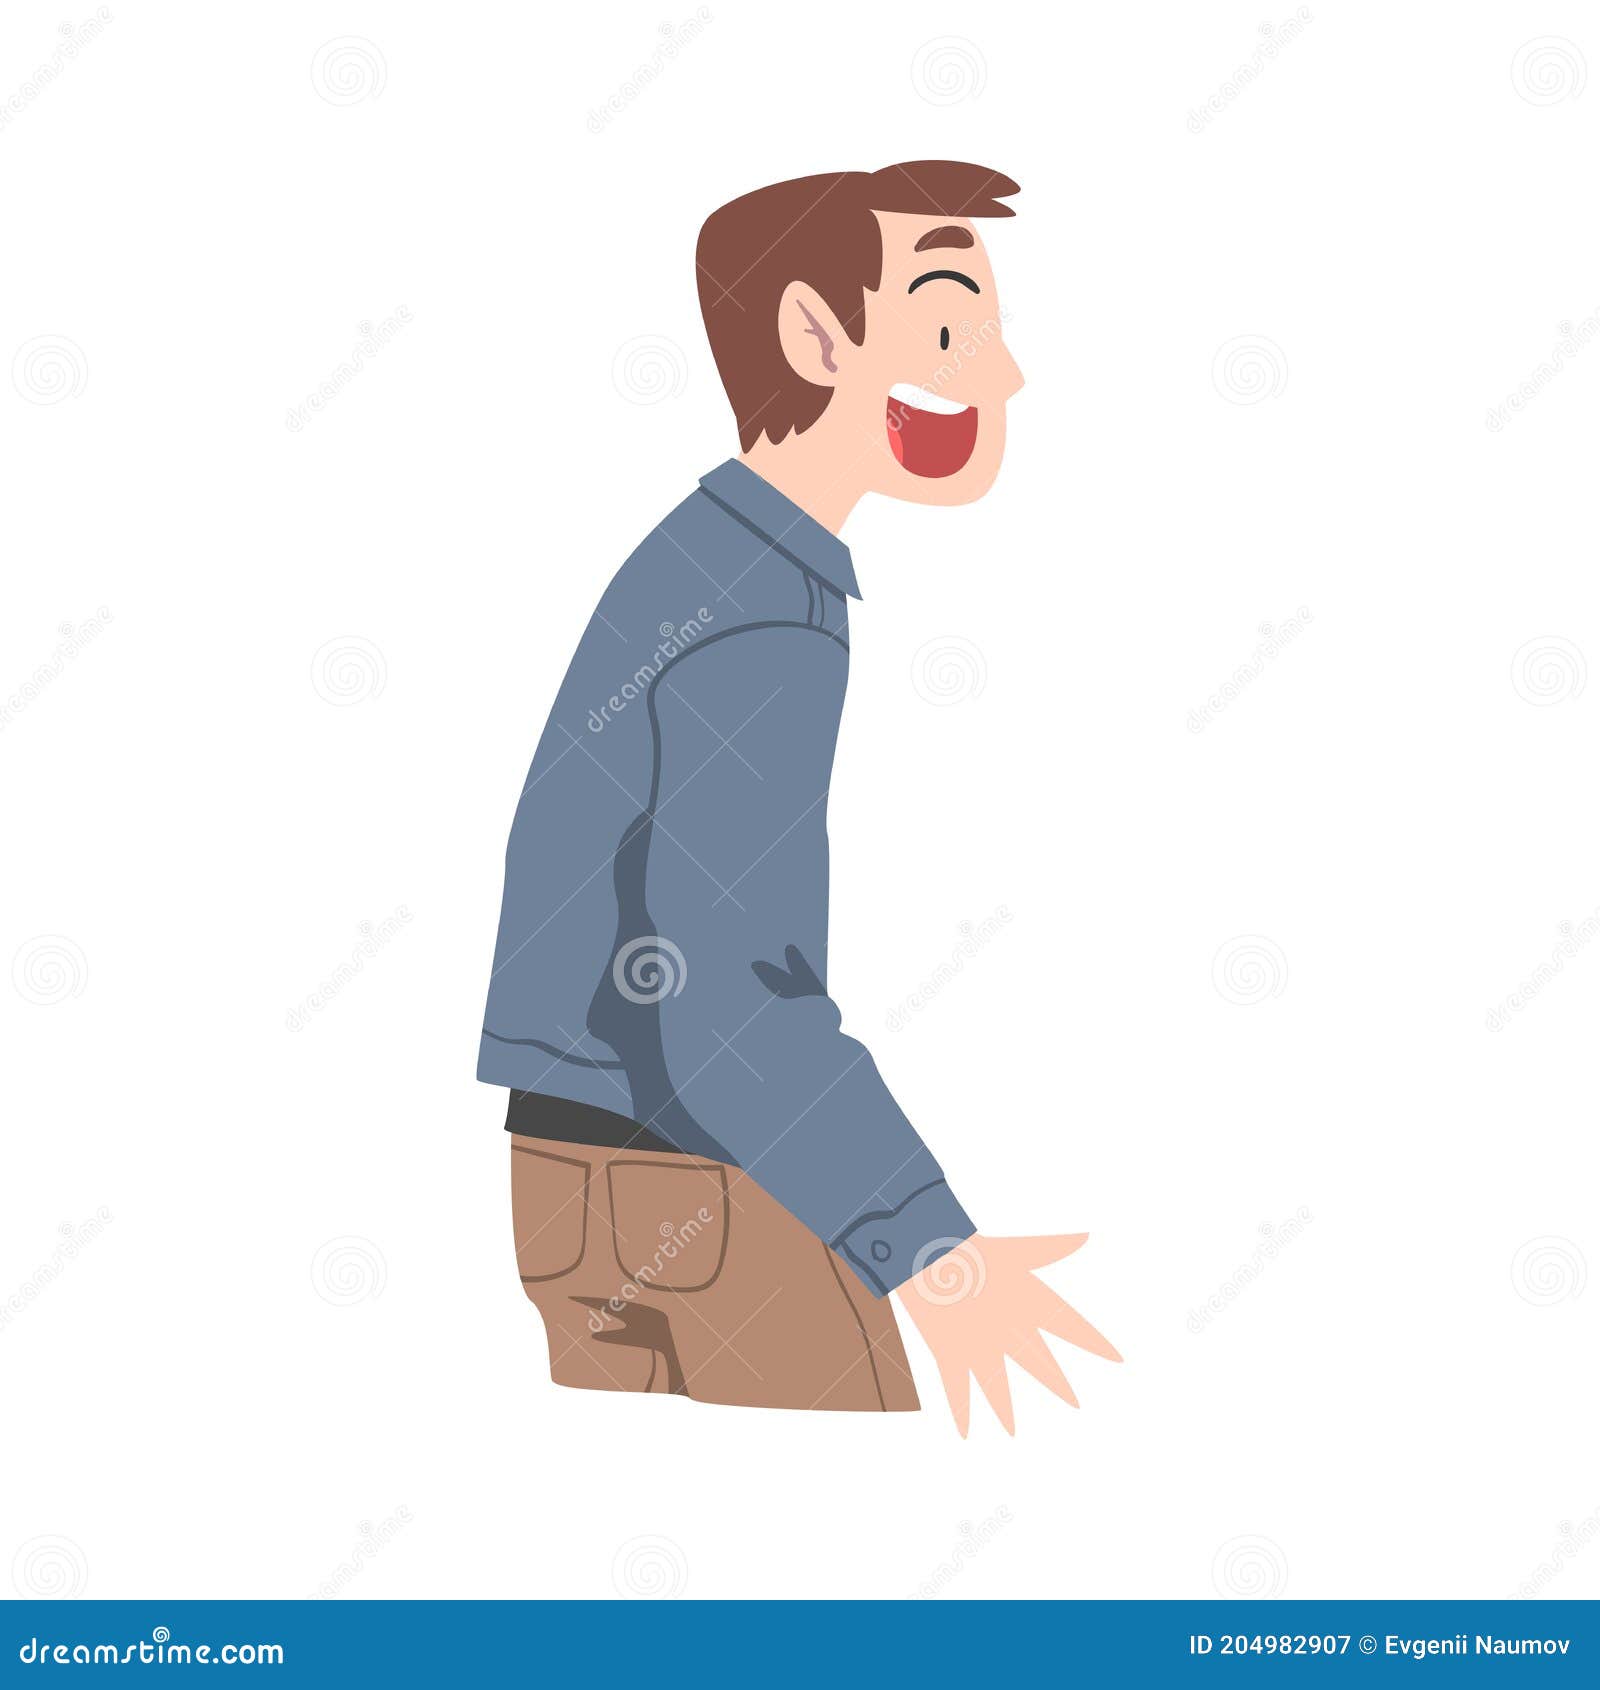 Astonished Young Man with Open Mouth, Emotional Reaction Concept, Surprised  and Amazed Person Character Cartoon Style Stock Vector - Illustration of  happiness, emotion: 204982907